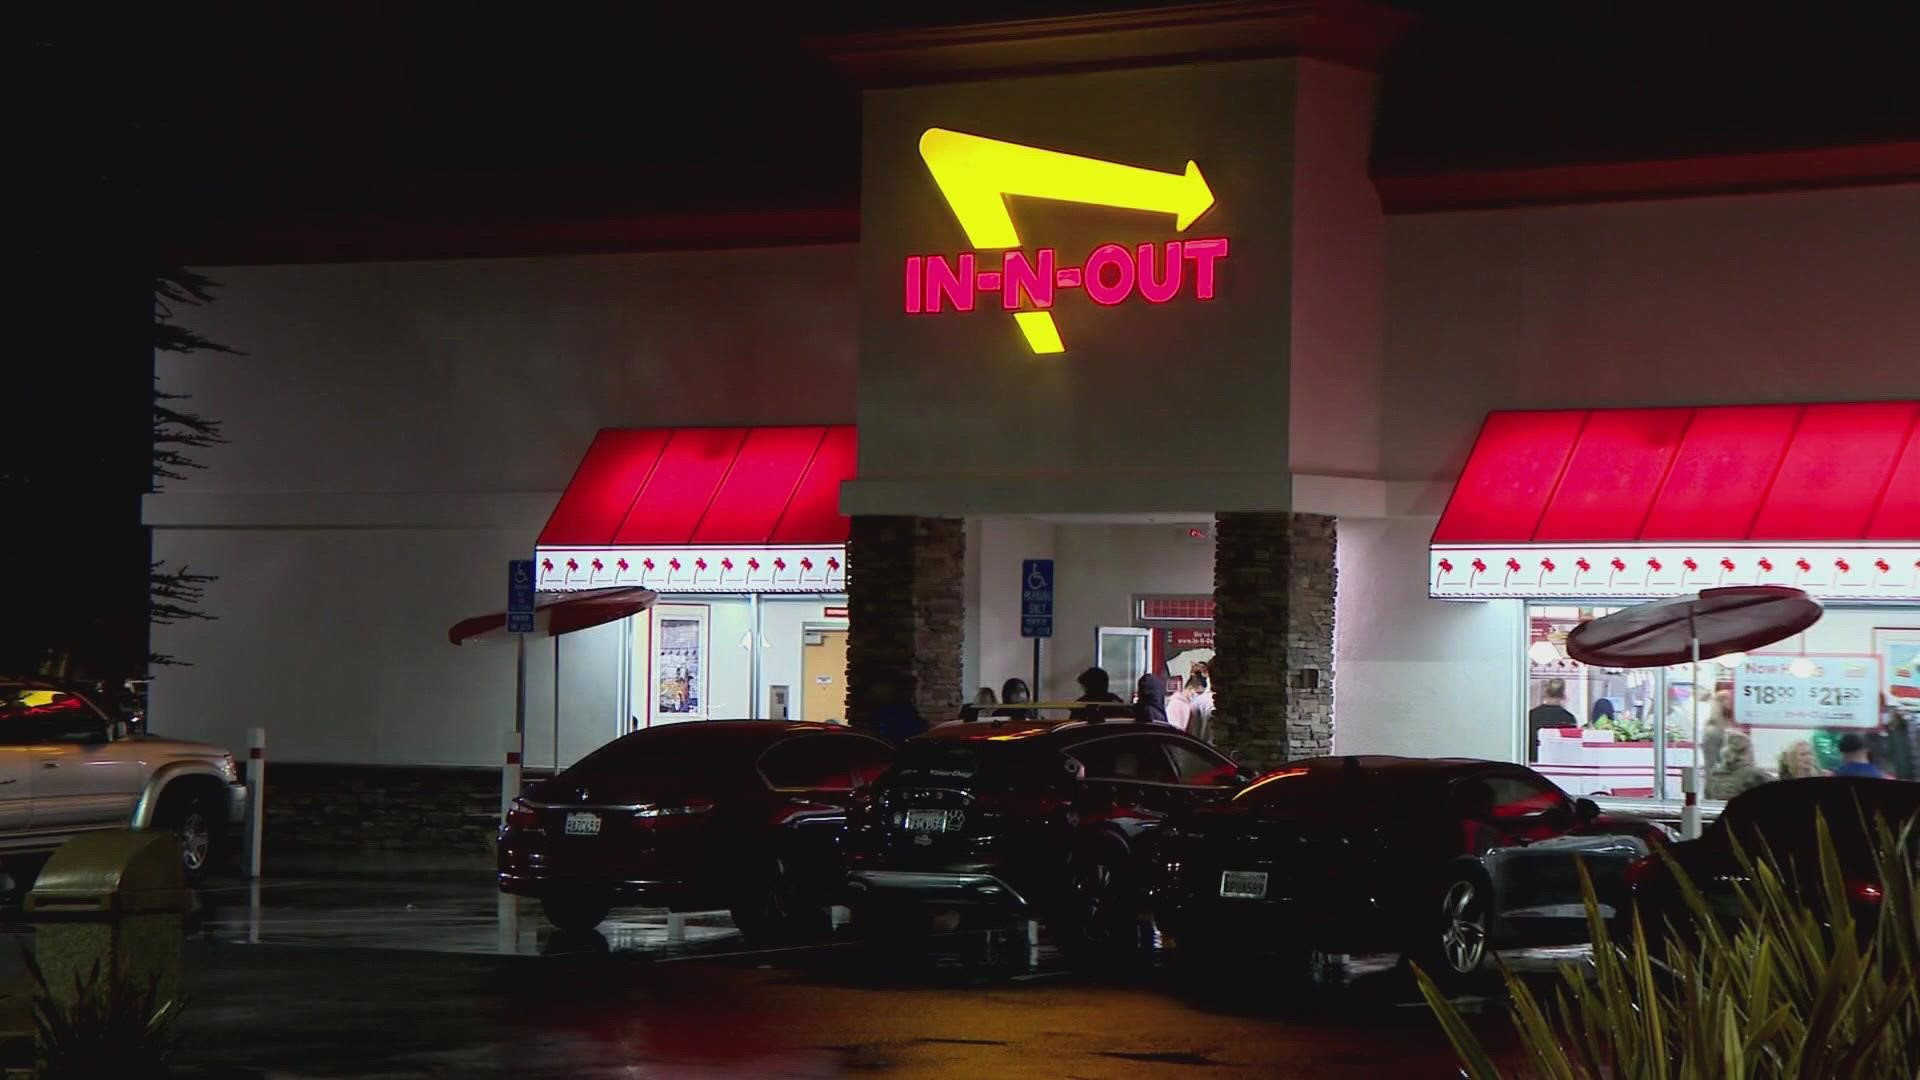 Gov. Bill Lee announced on Tuesday that In-N-Out Burger will establish an eastern corporate office in Franklin, according to a press release.